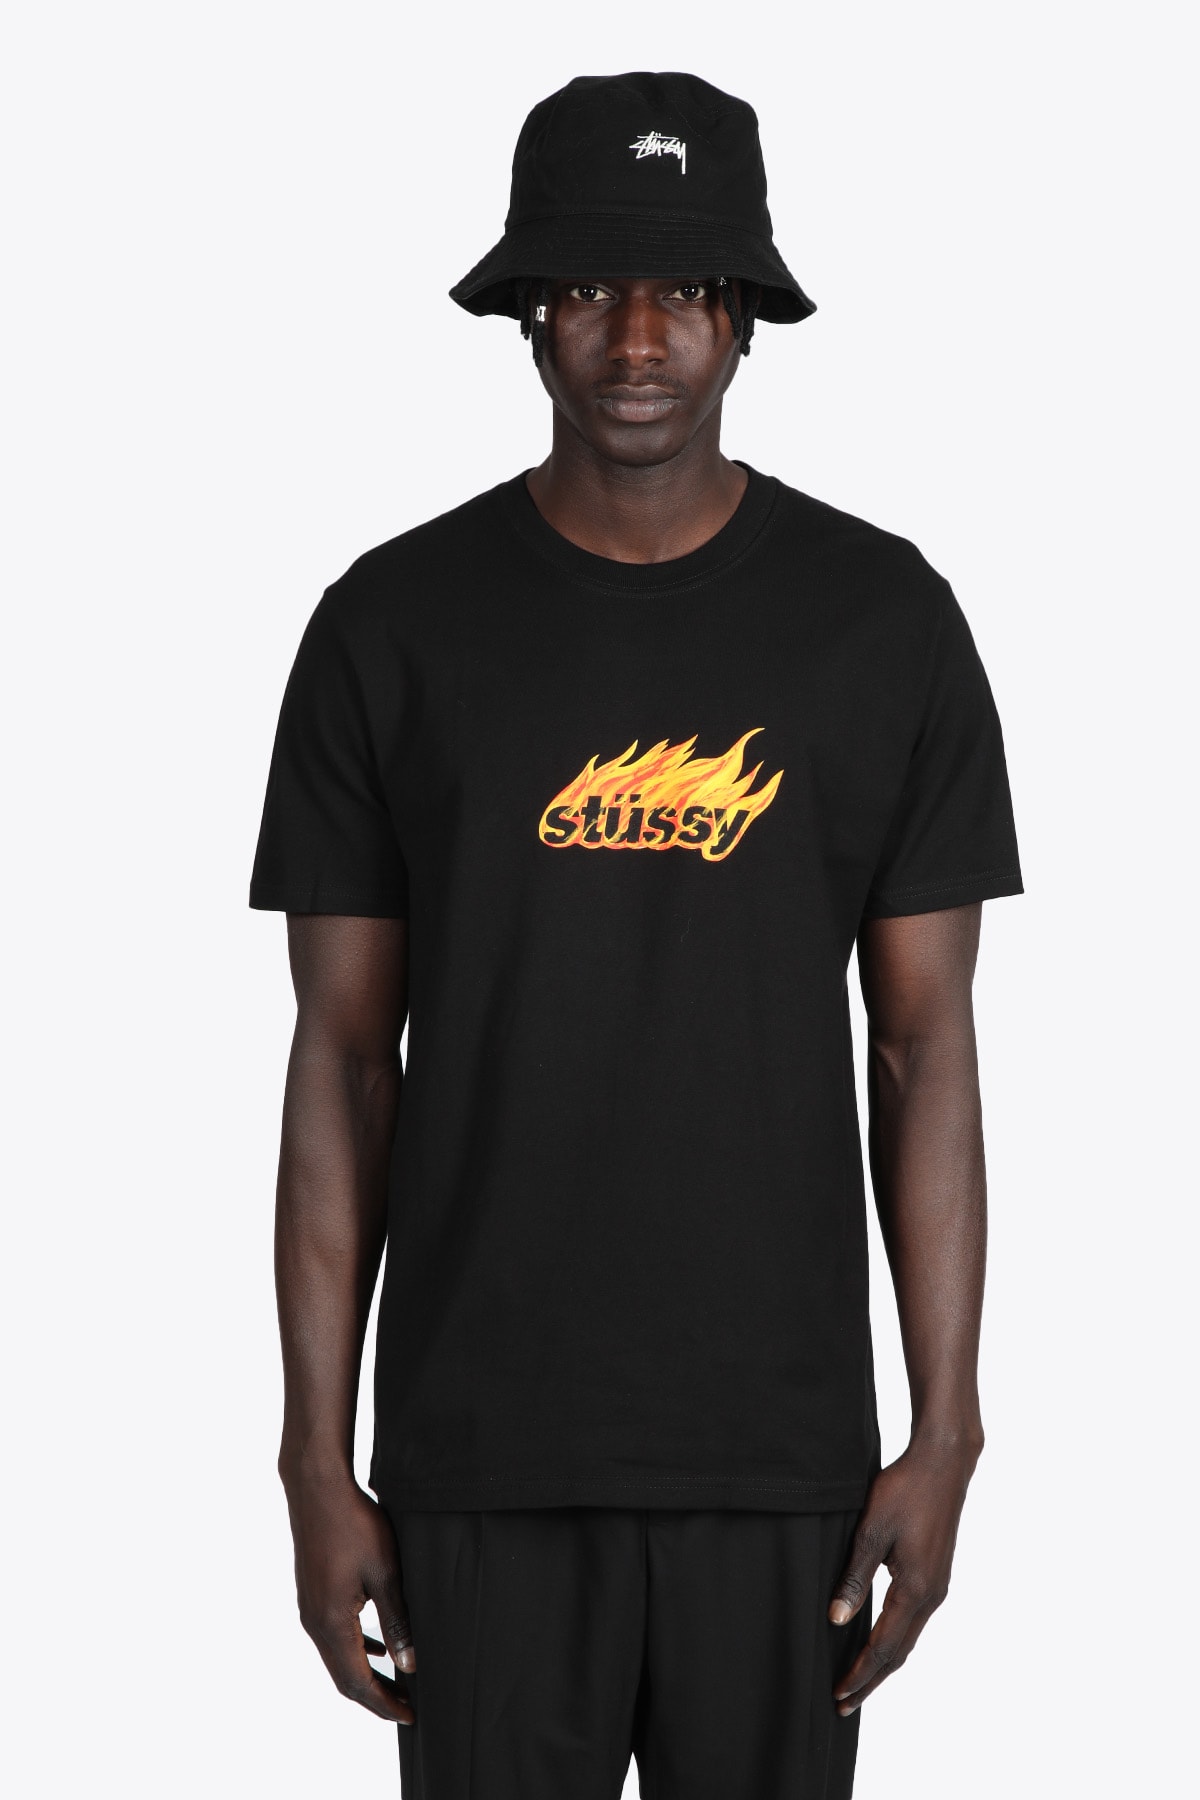 Stussy Flames Tee Black cotton t-shirt with flames logo - Flames tee